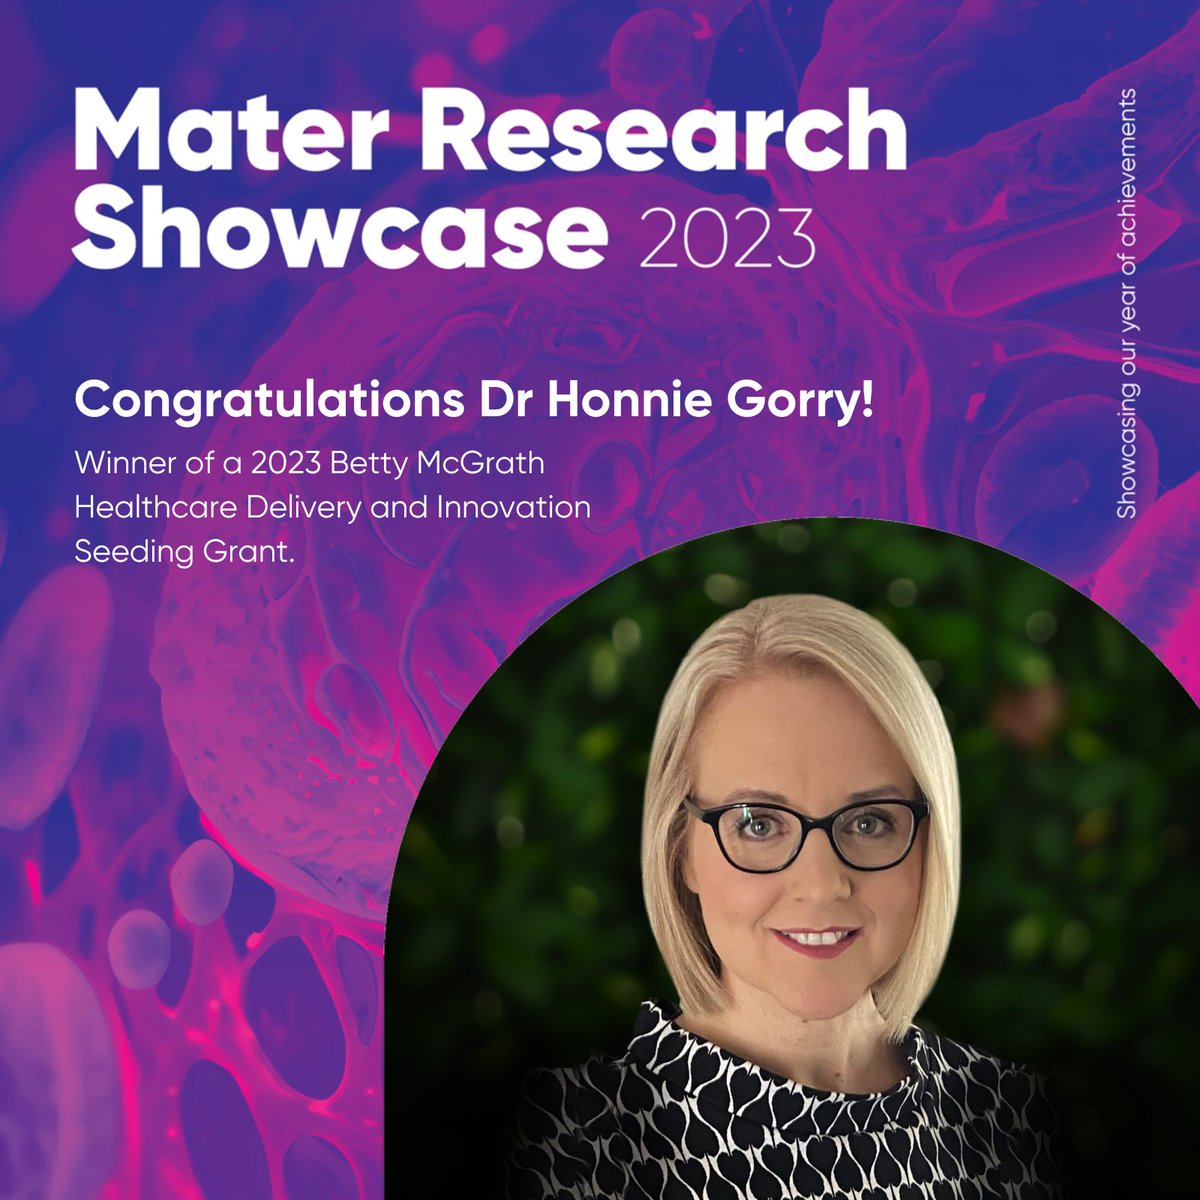 Congratulations to Dr Honnie Gorry, winner of a 2023 Betty McGrath Healthcare Delivery and Innovation Seeding Grant. Dr Gorry is a Clinical Psychologist and Clinical Neurophysiologist at Mater.